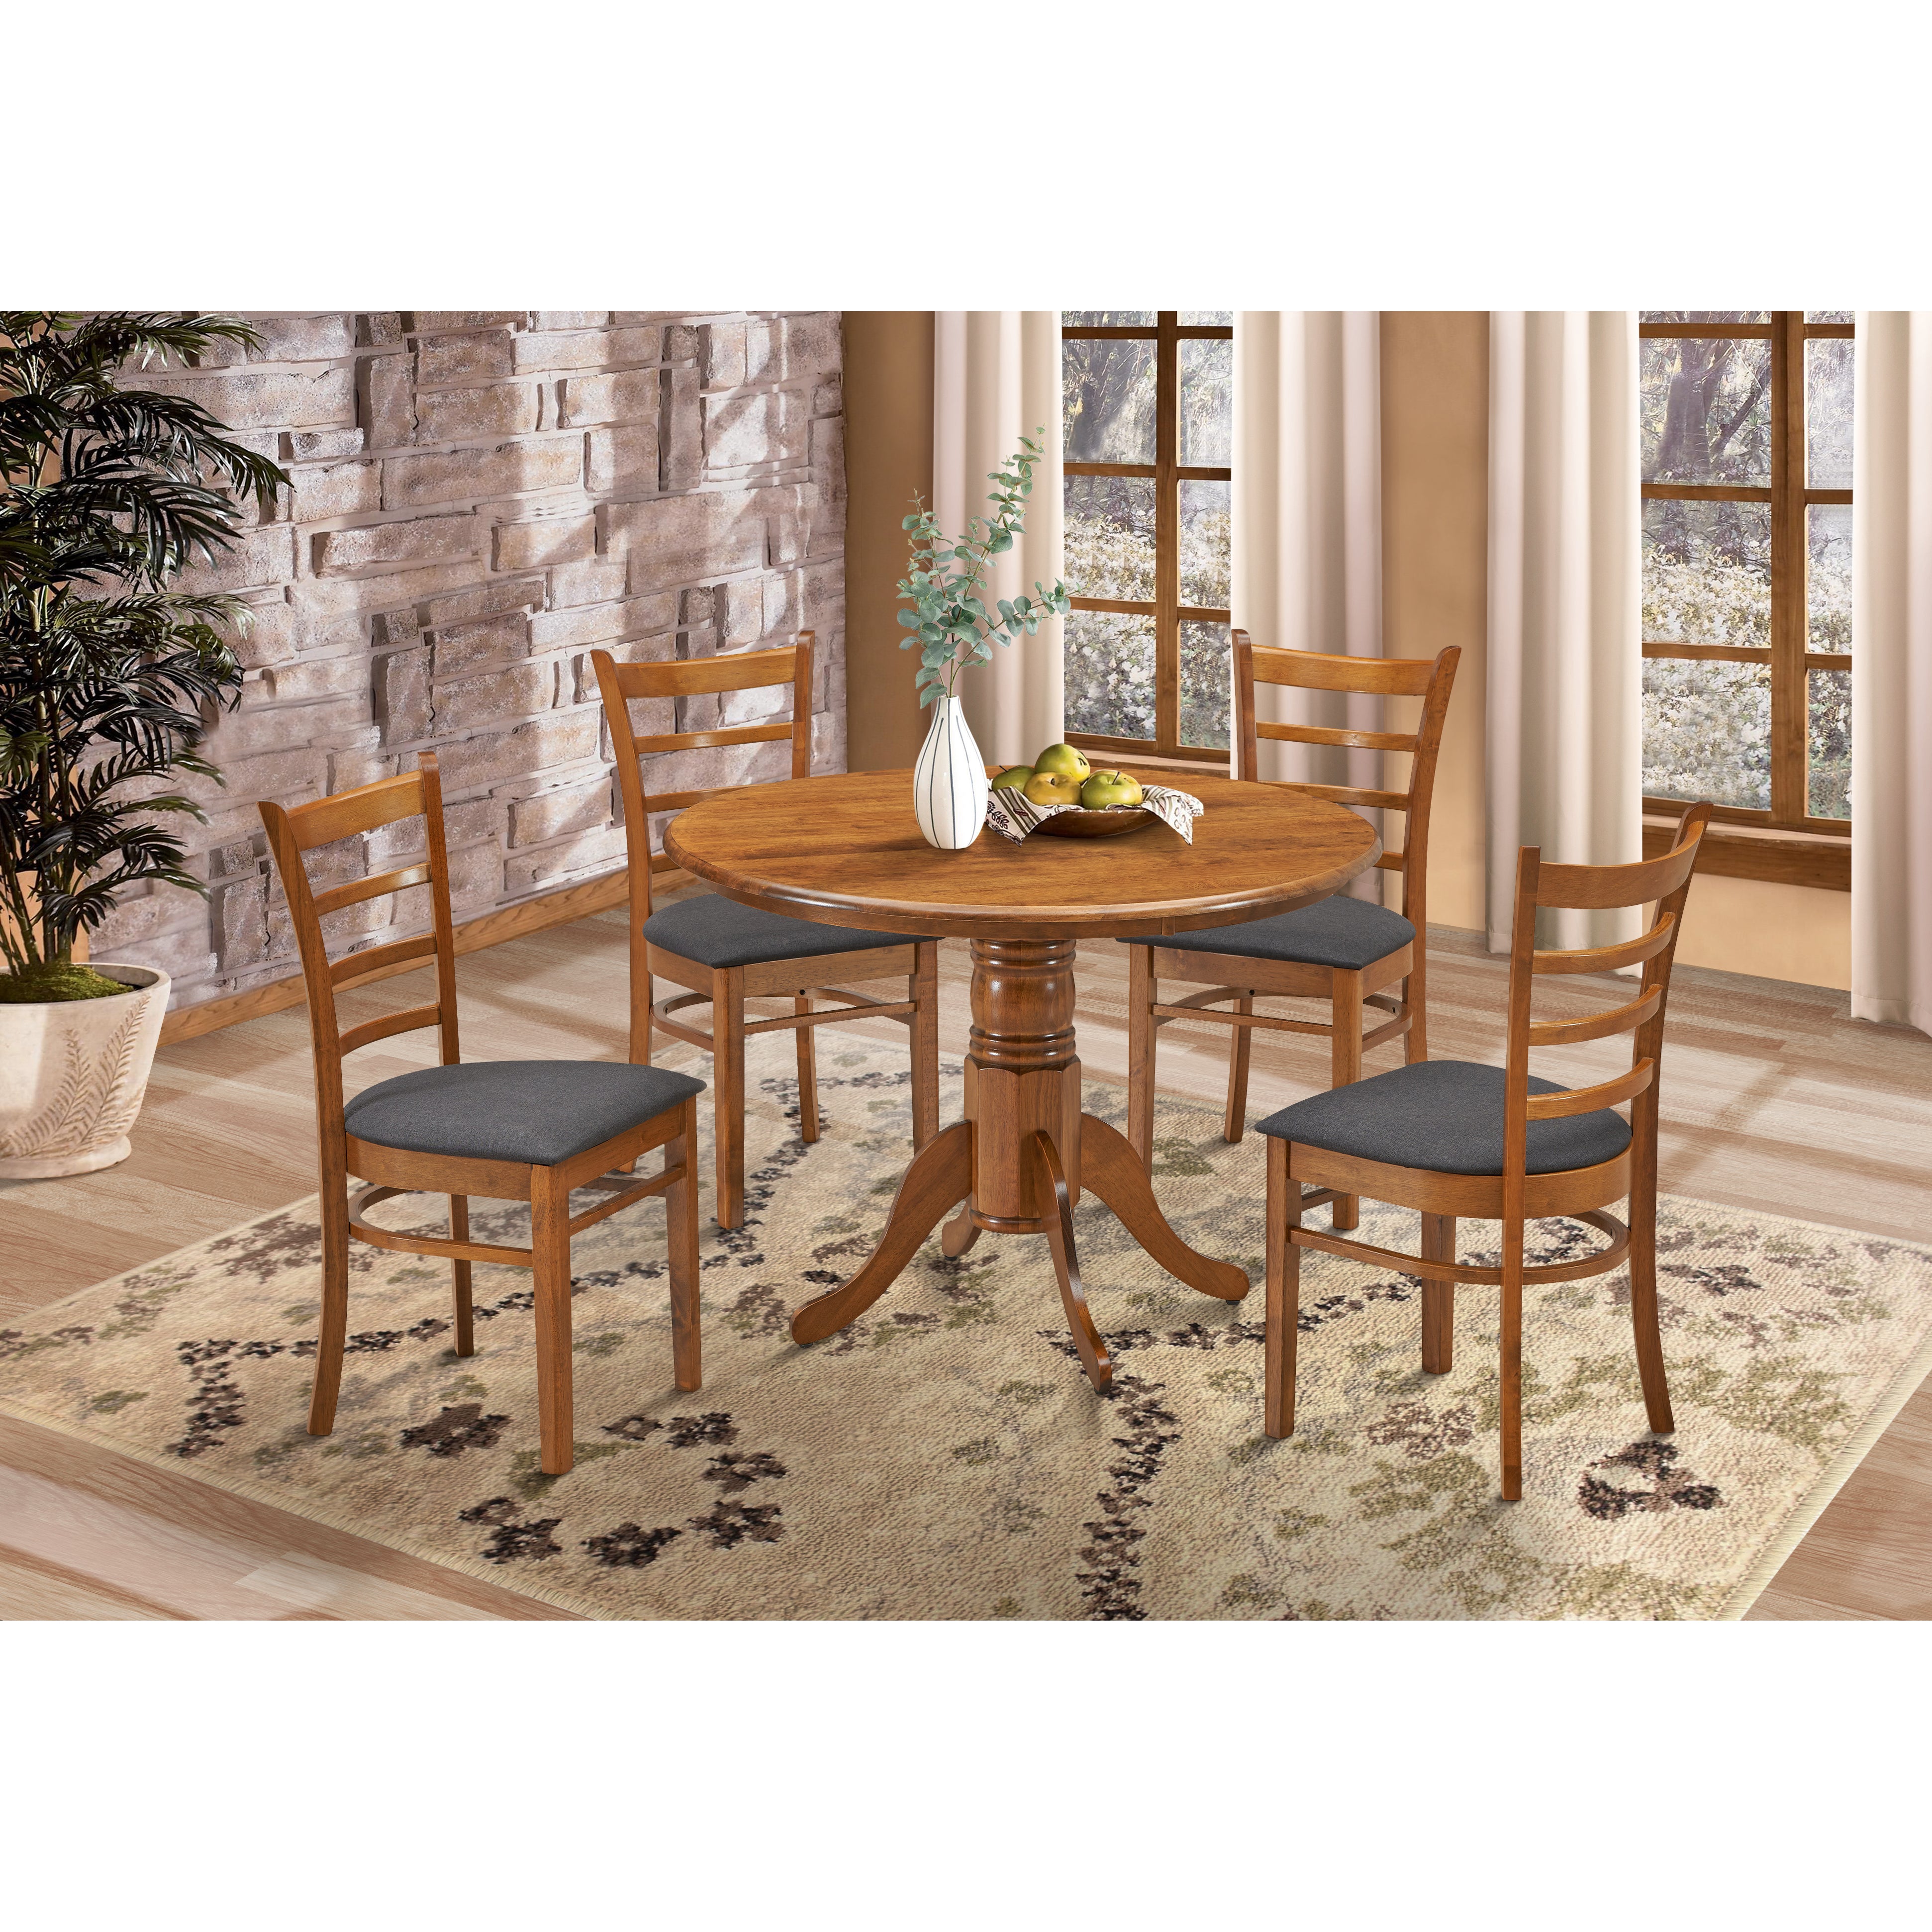 Linaria Dining Chair Set of 6 Crossback Solid Rubber Wood Fabric Seat - Walnut Deals499